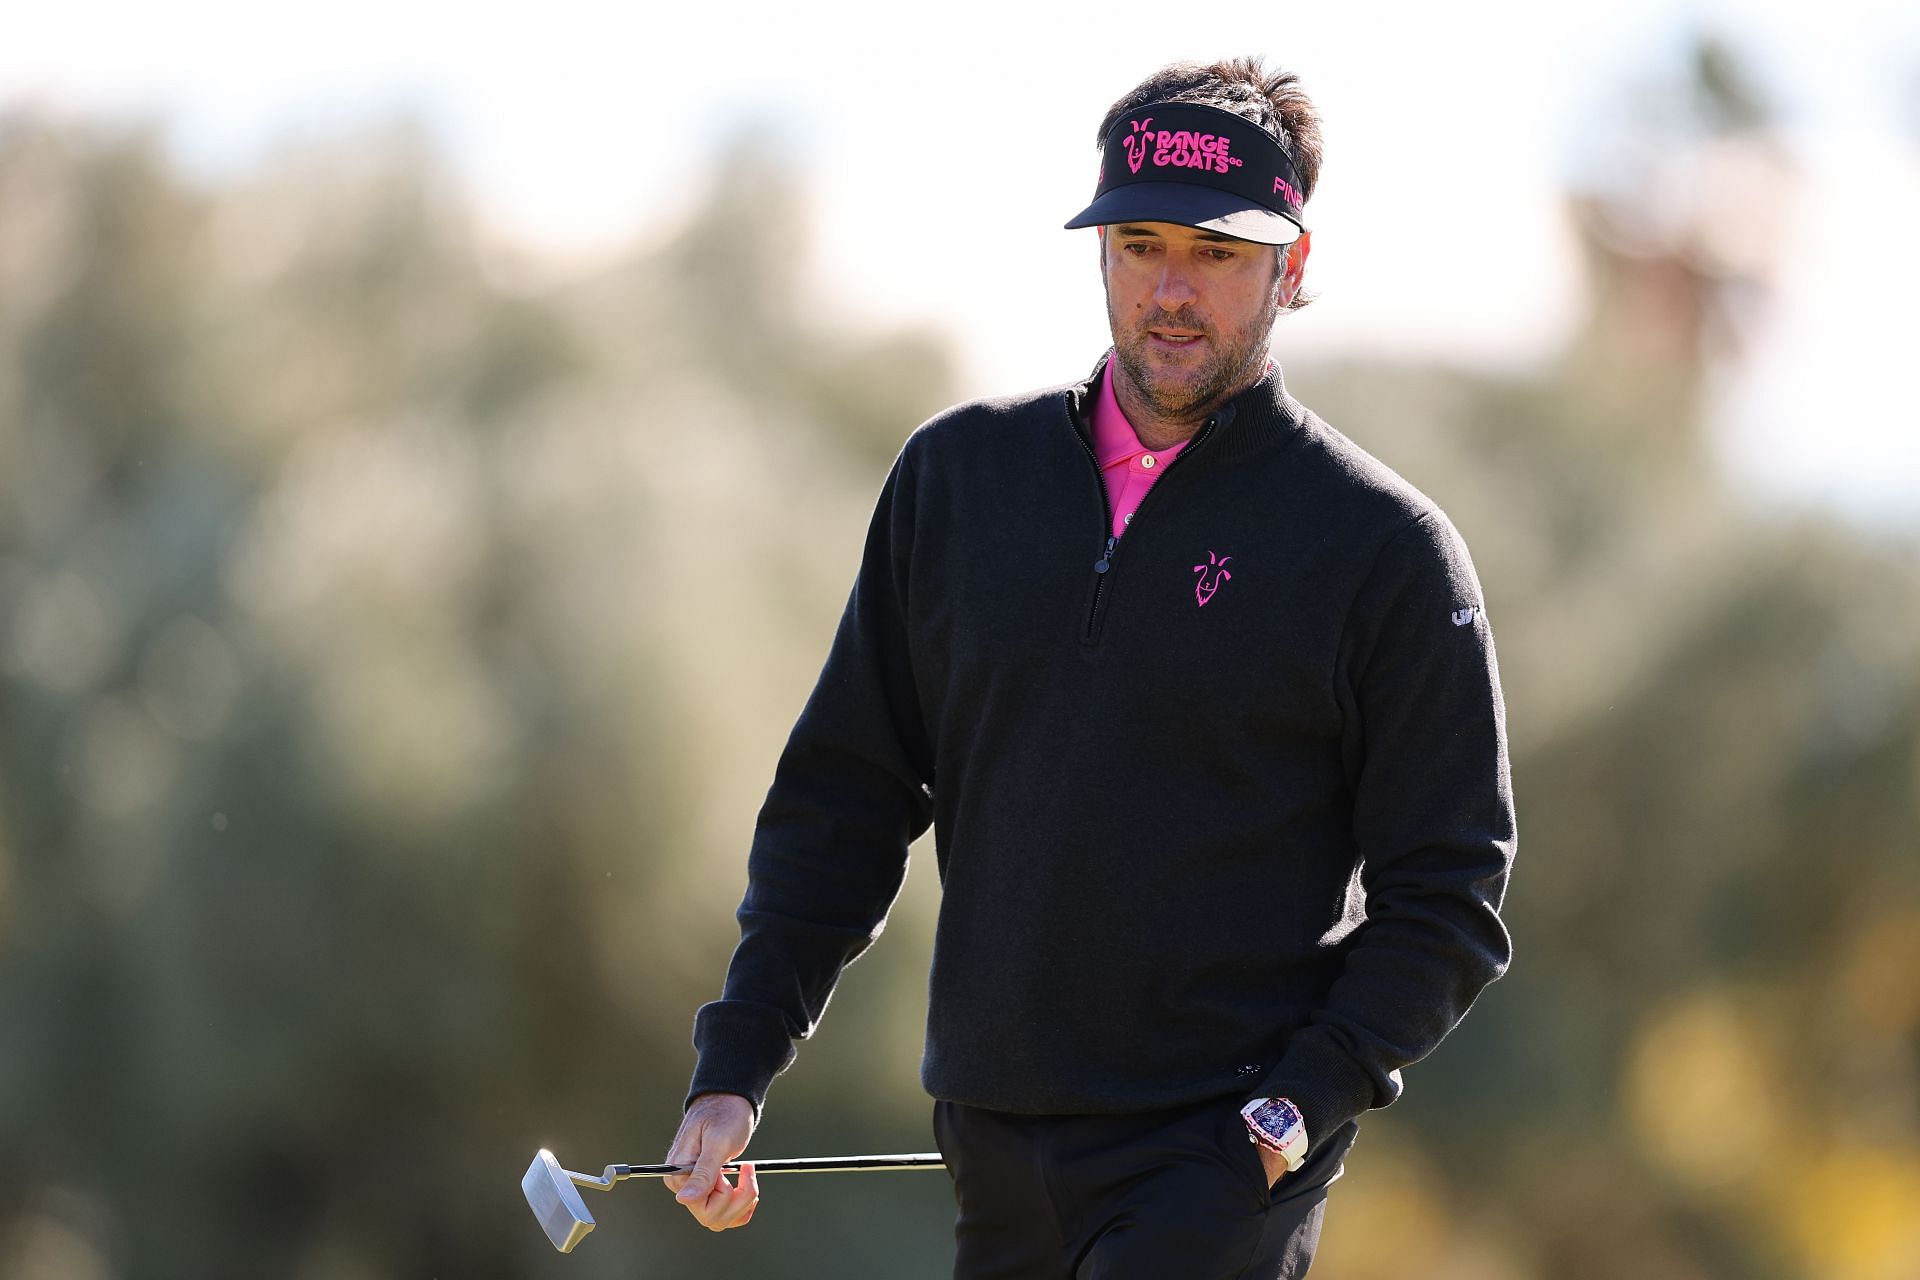 Bubba Watson is reportedly considering retiring